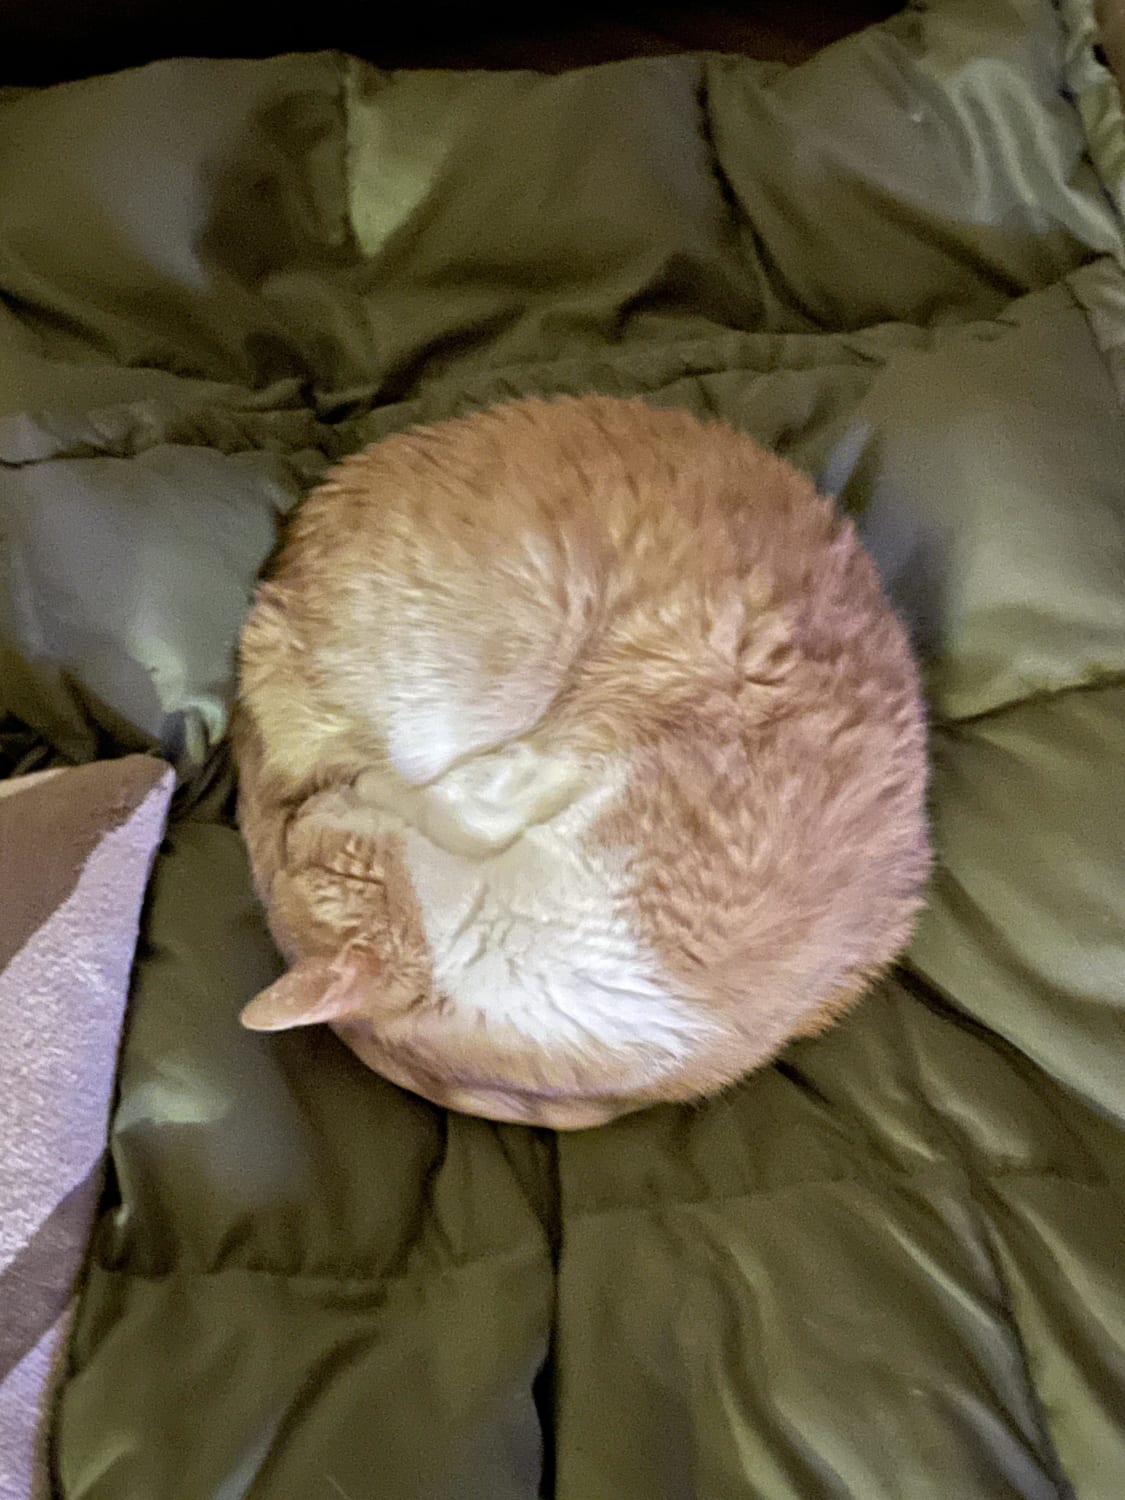 My cat sleeping in a perfect circle